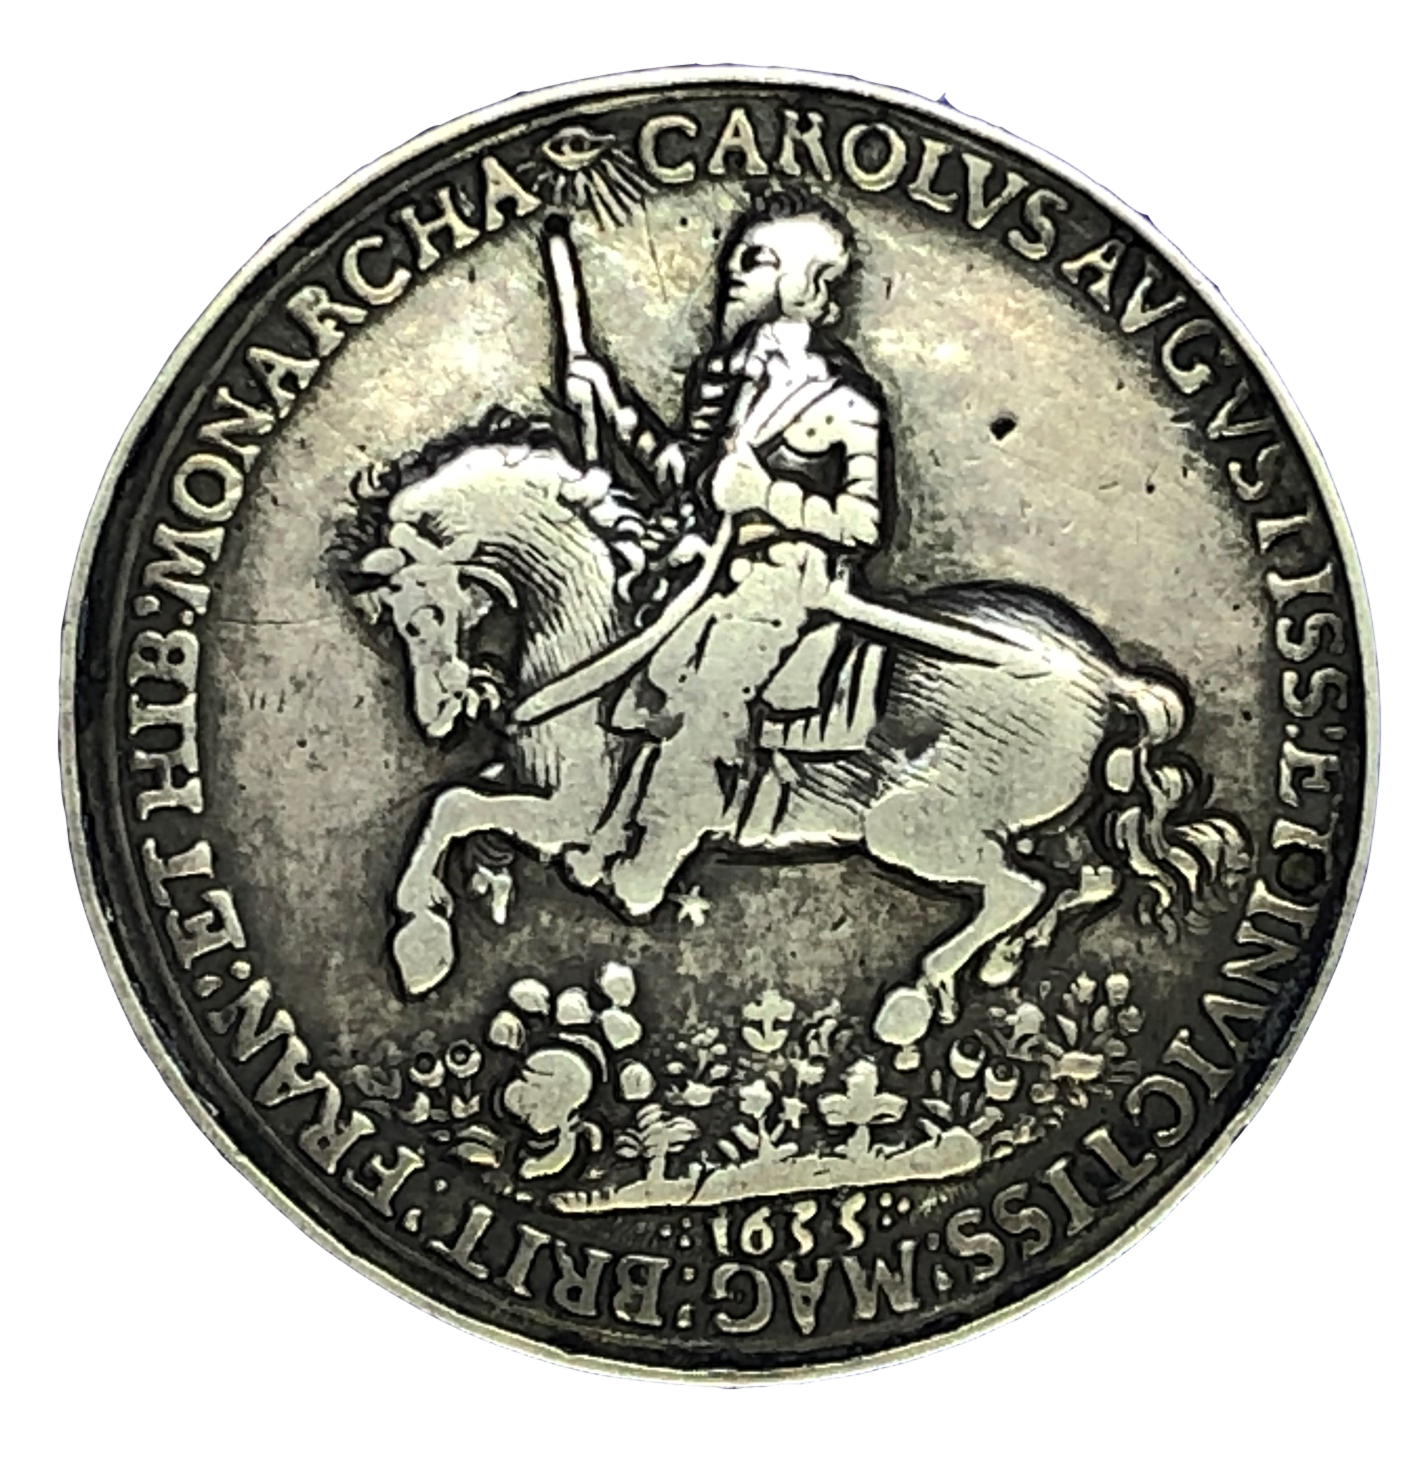 1633 Charles I - Return to London After Scottish Coronation Historical Medallion by N Briot Obverse